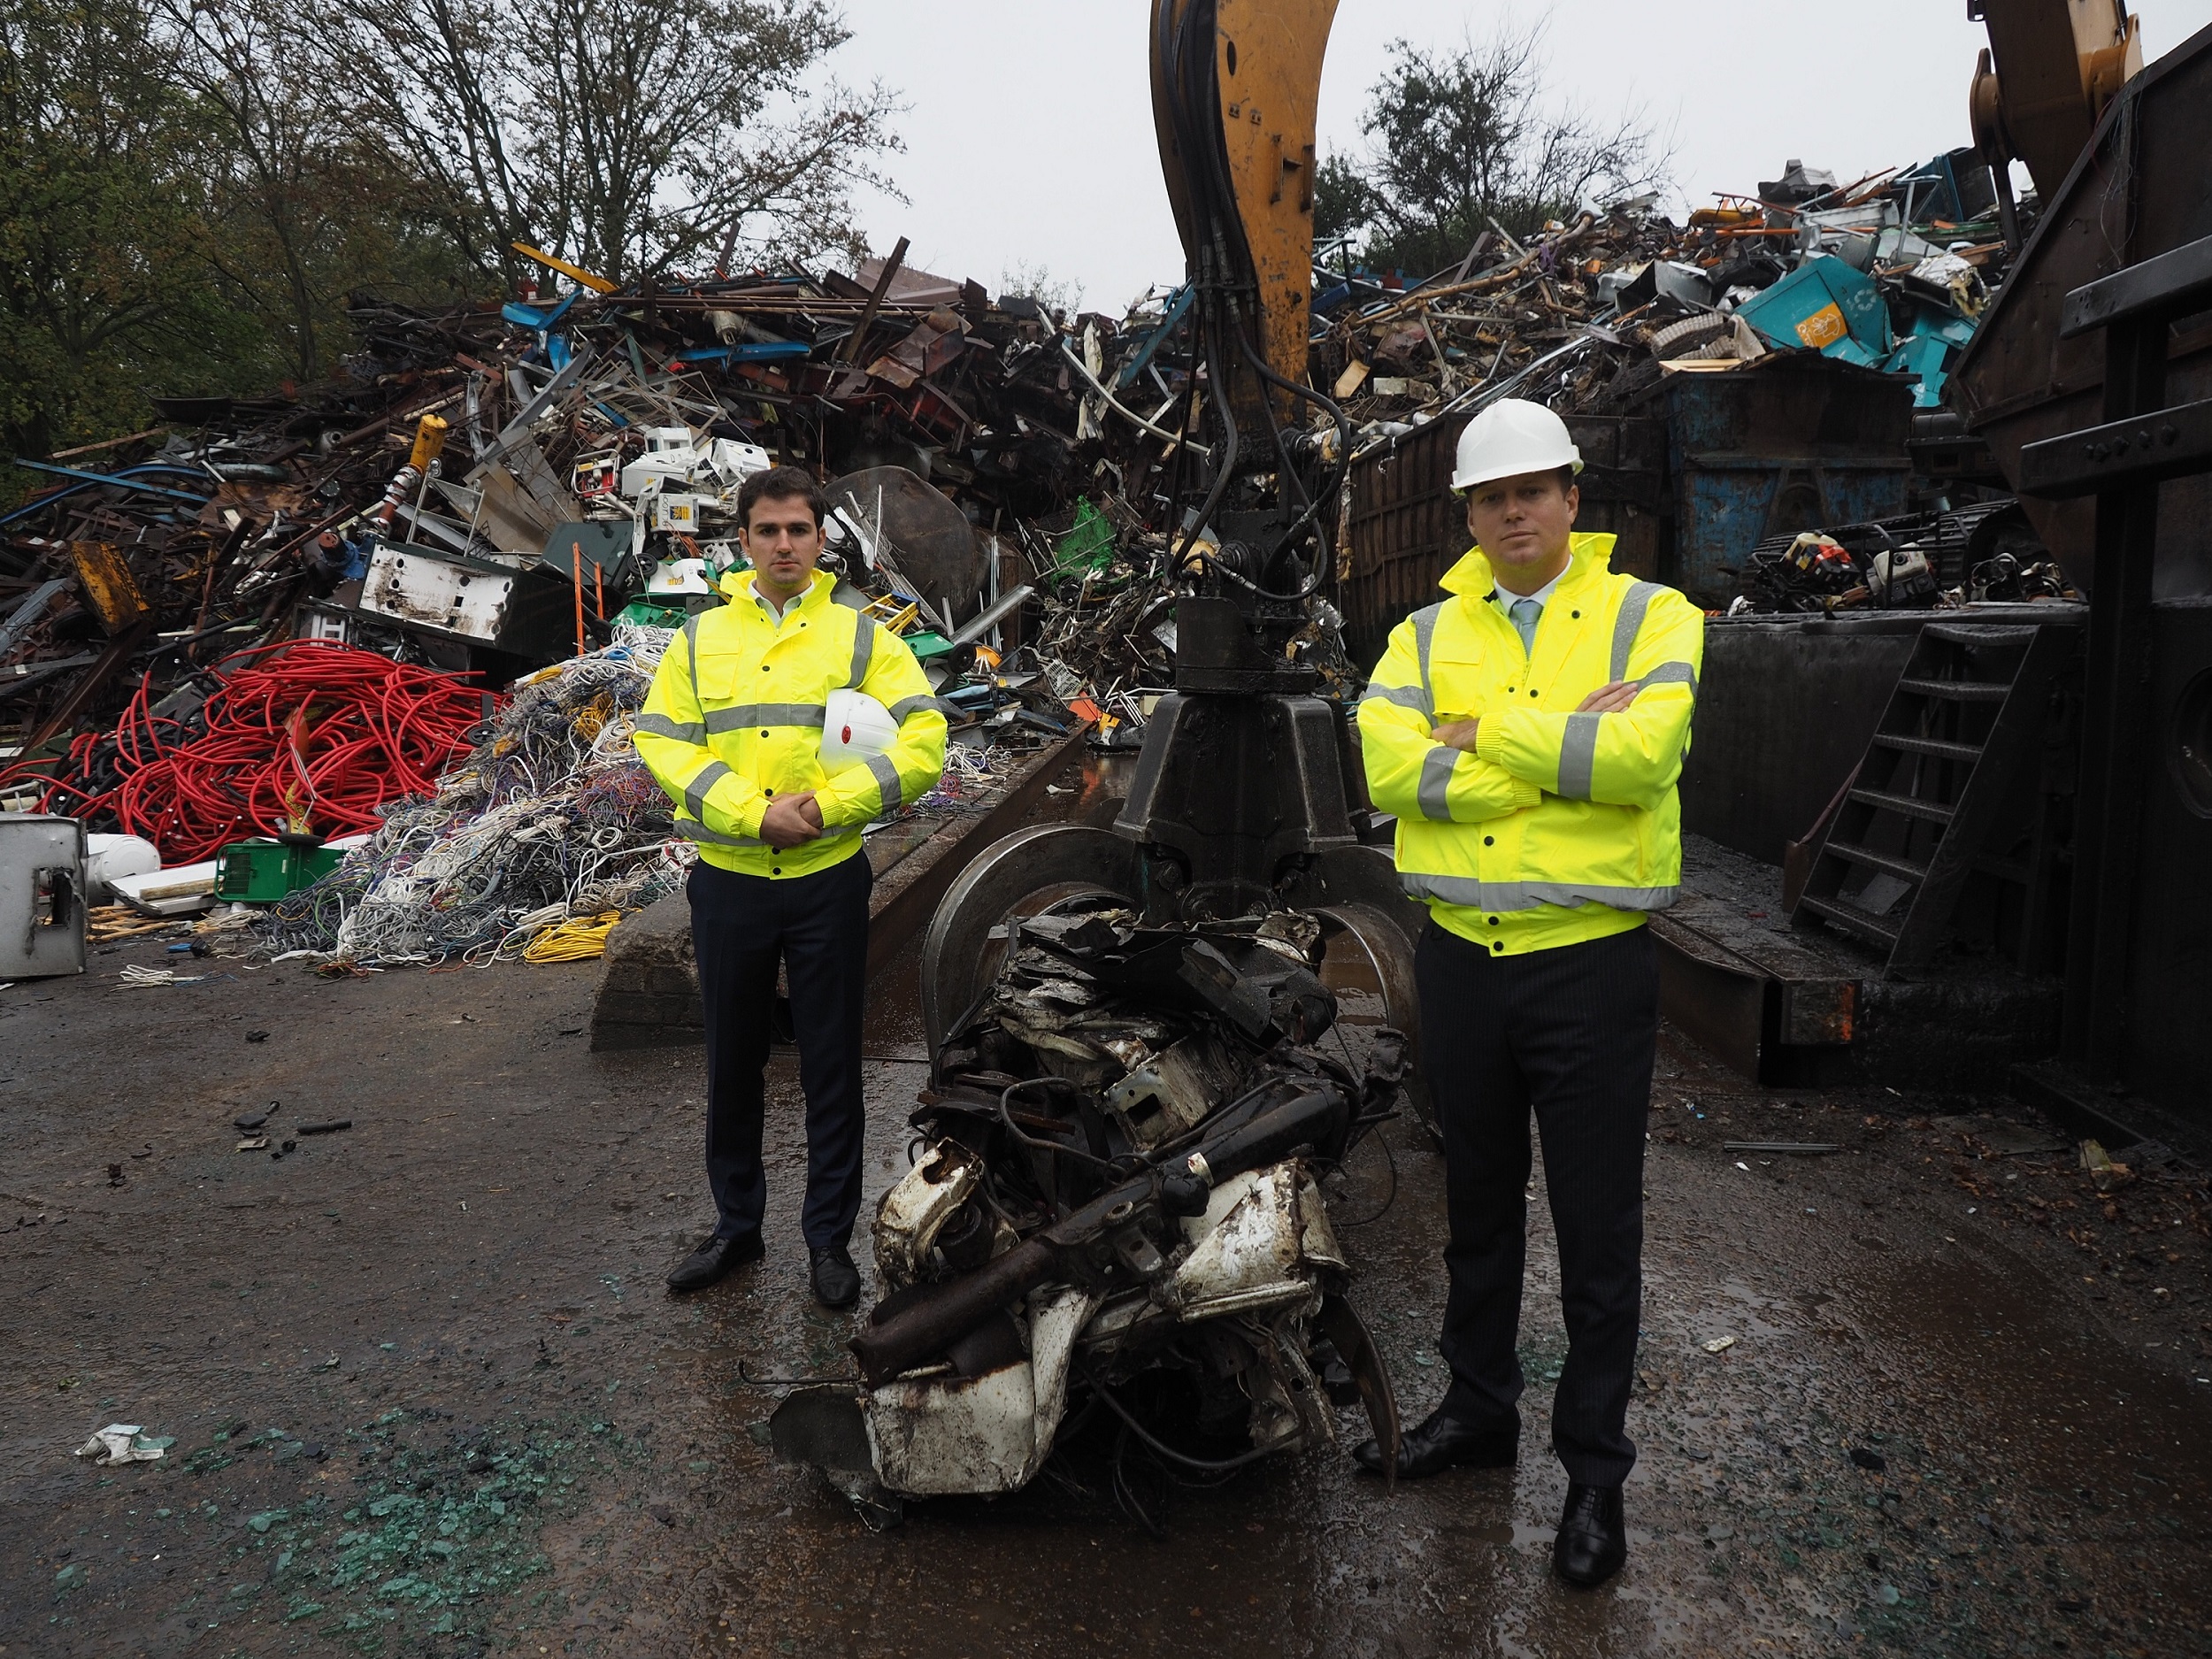 After: Councillor Roberto Weeden-Sanz (left), Chair of the Safer Communities Partnership Board, and Leader of Barnet Council, Councillor Dan Thomas, at the truck crushing